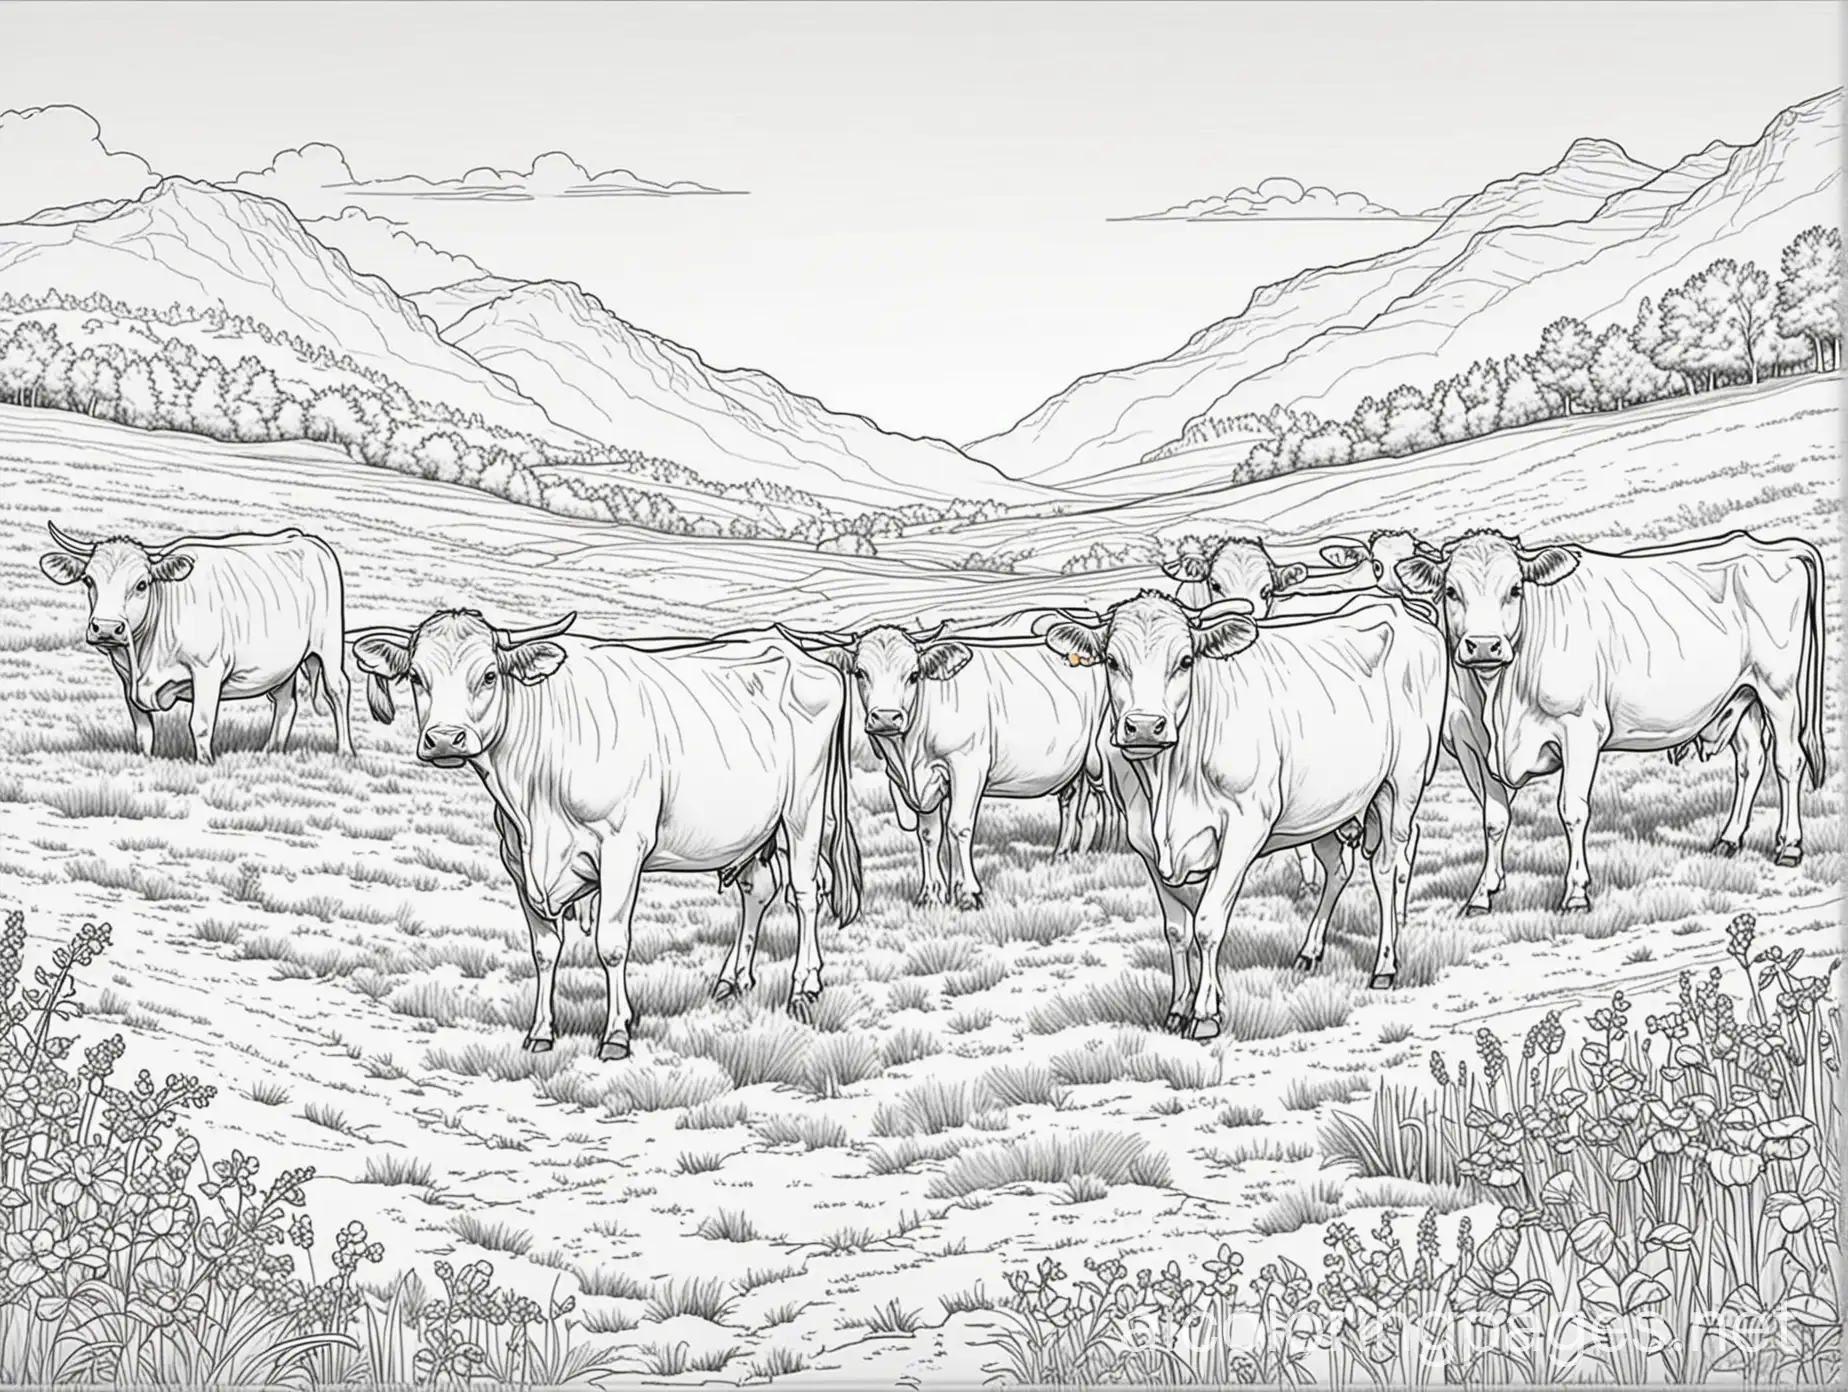 Serene-Cow-Field-Coloring-Page-Tranquil-Landscape-in-Black-and-White